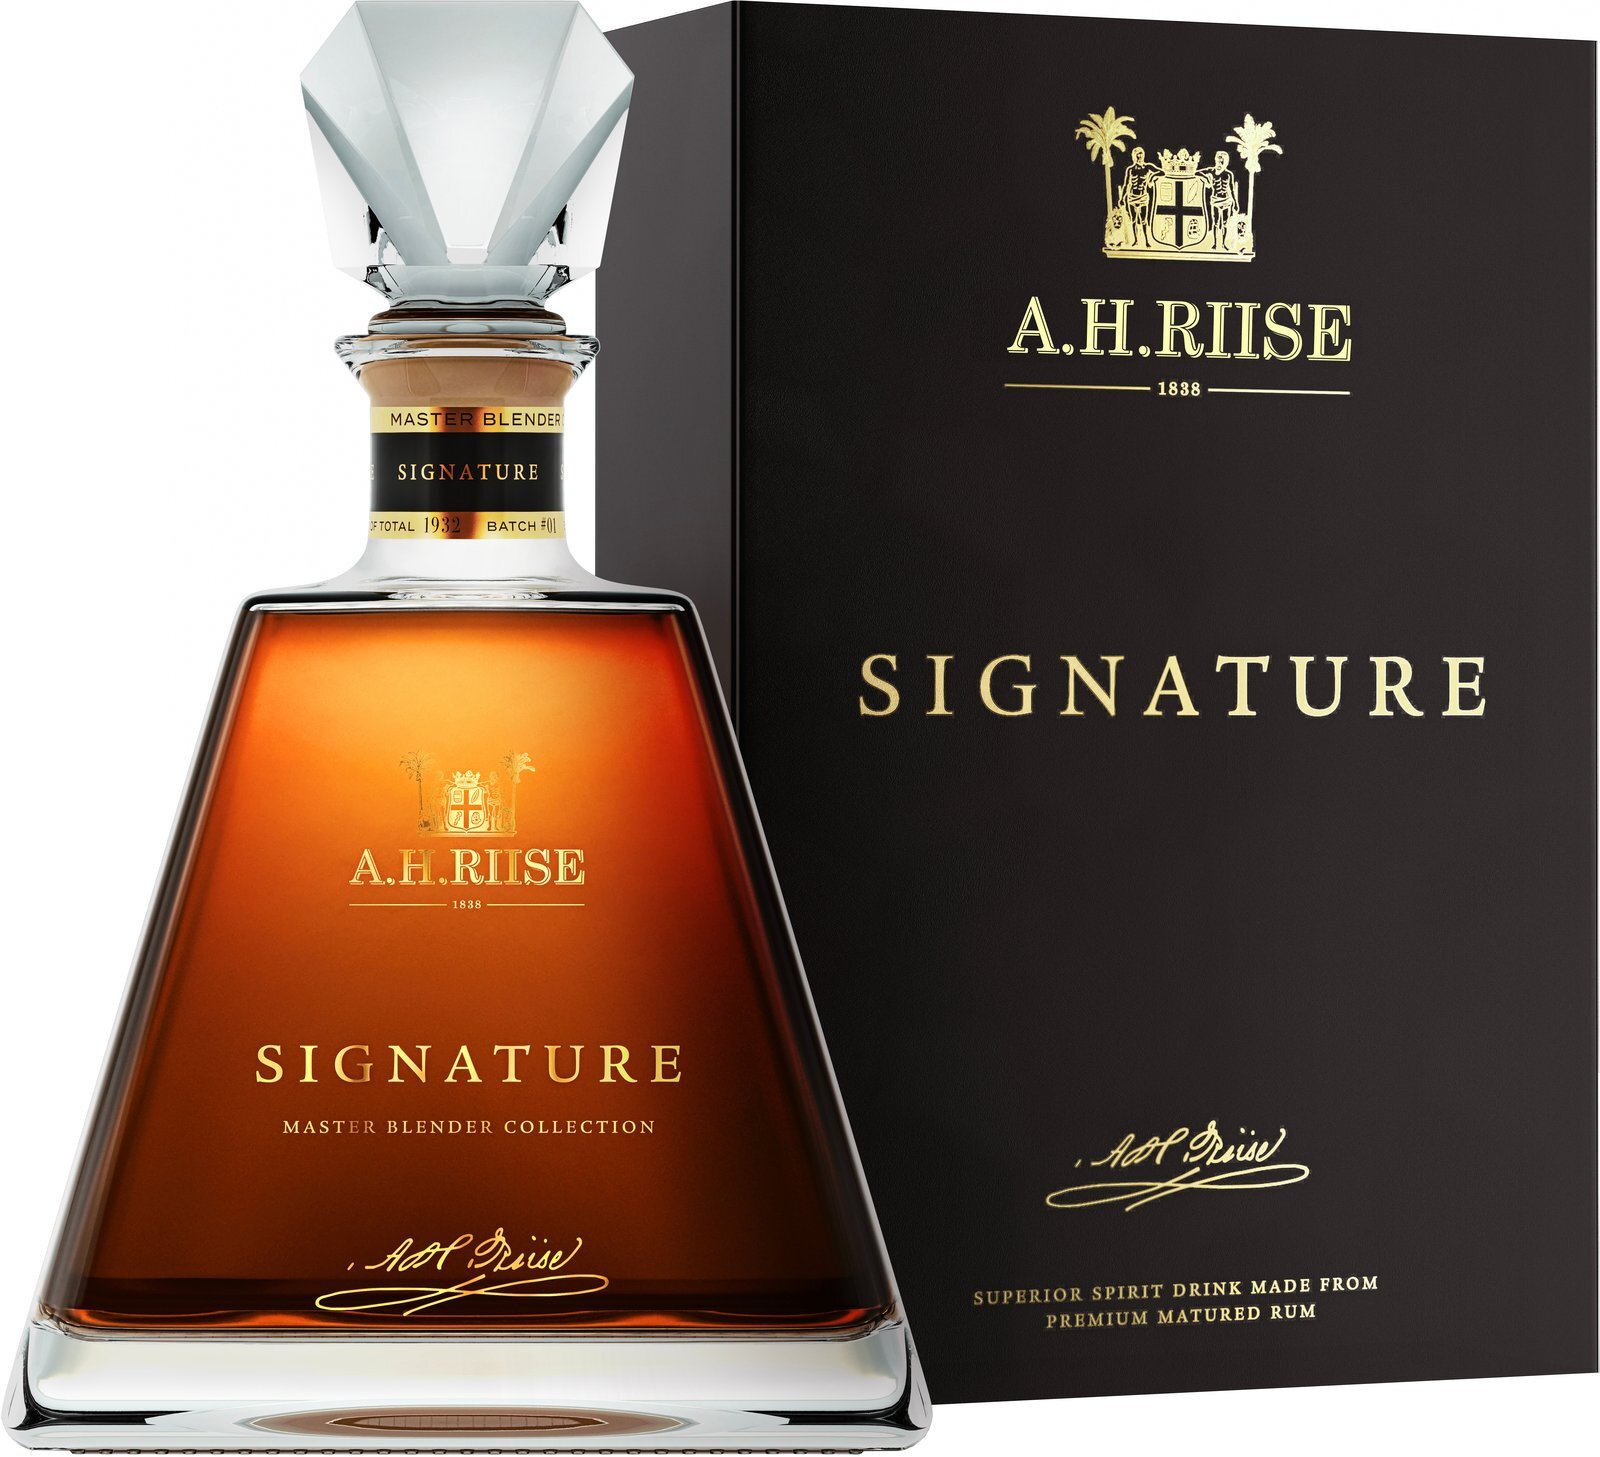 A. H. Riise A.H.Riise Signature 43,9% 0,7 l